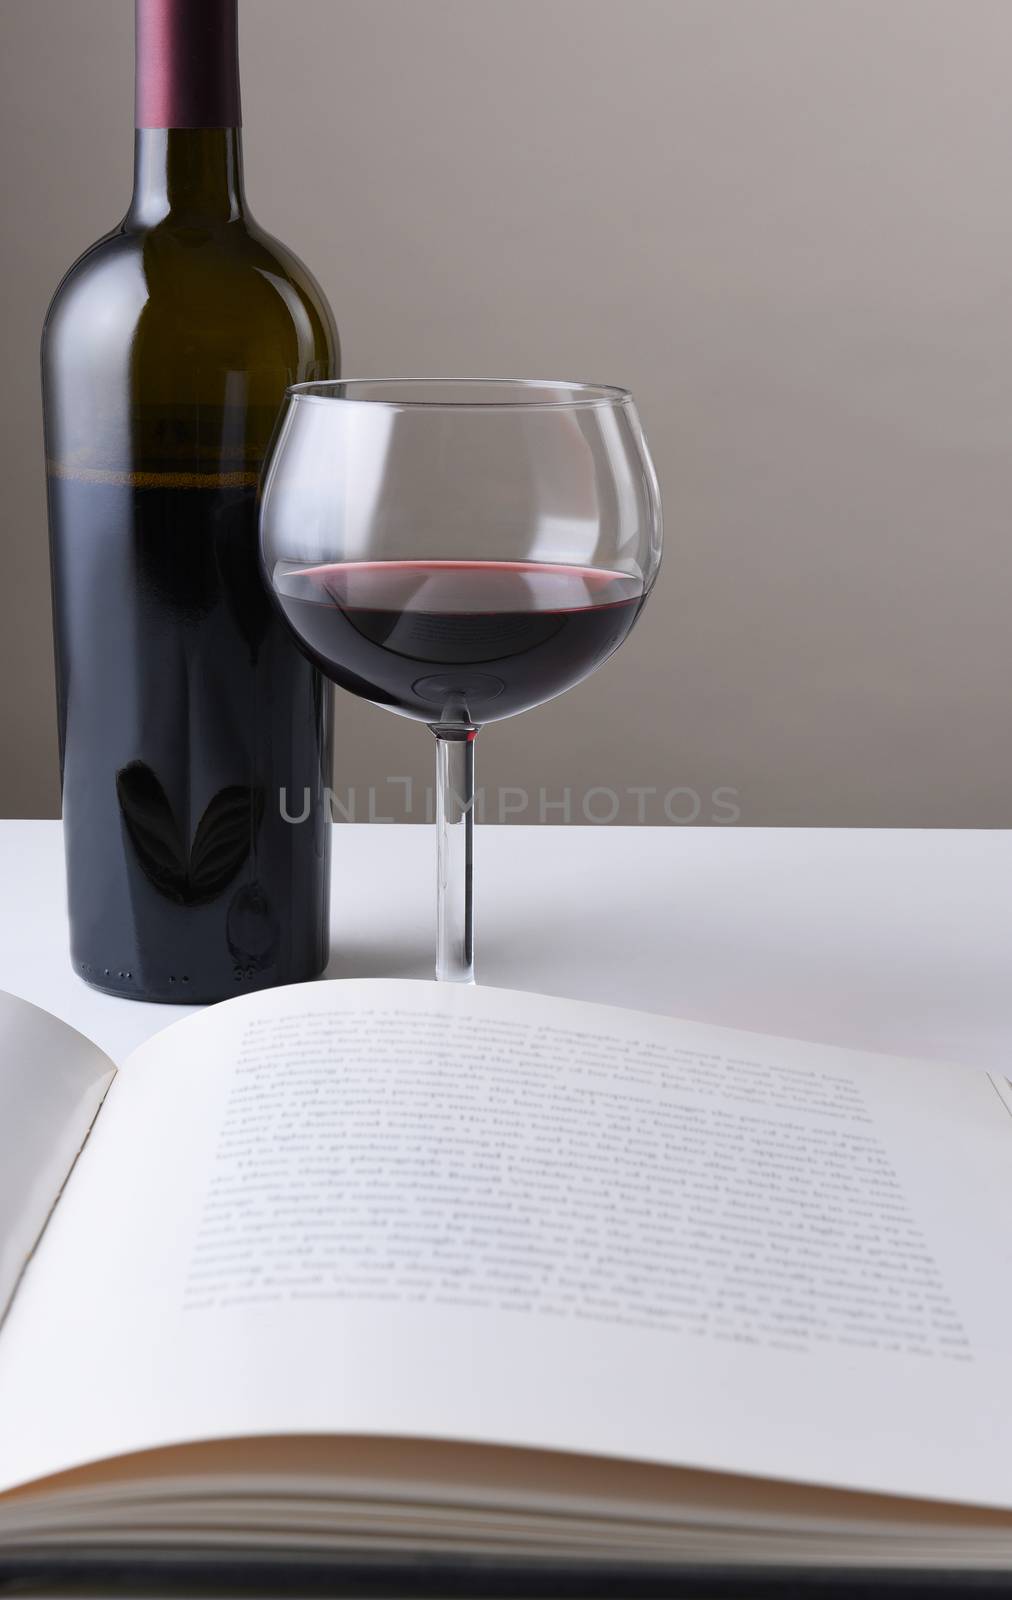 Wine bottle and glass behind an open book. The pages of the book are blurred. Vertical format with copy space.